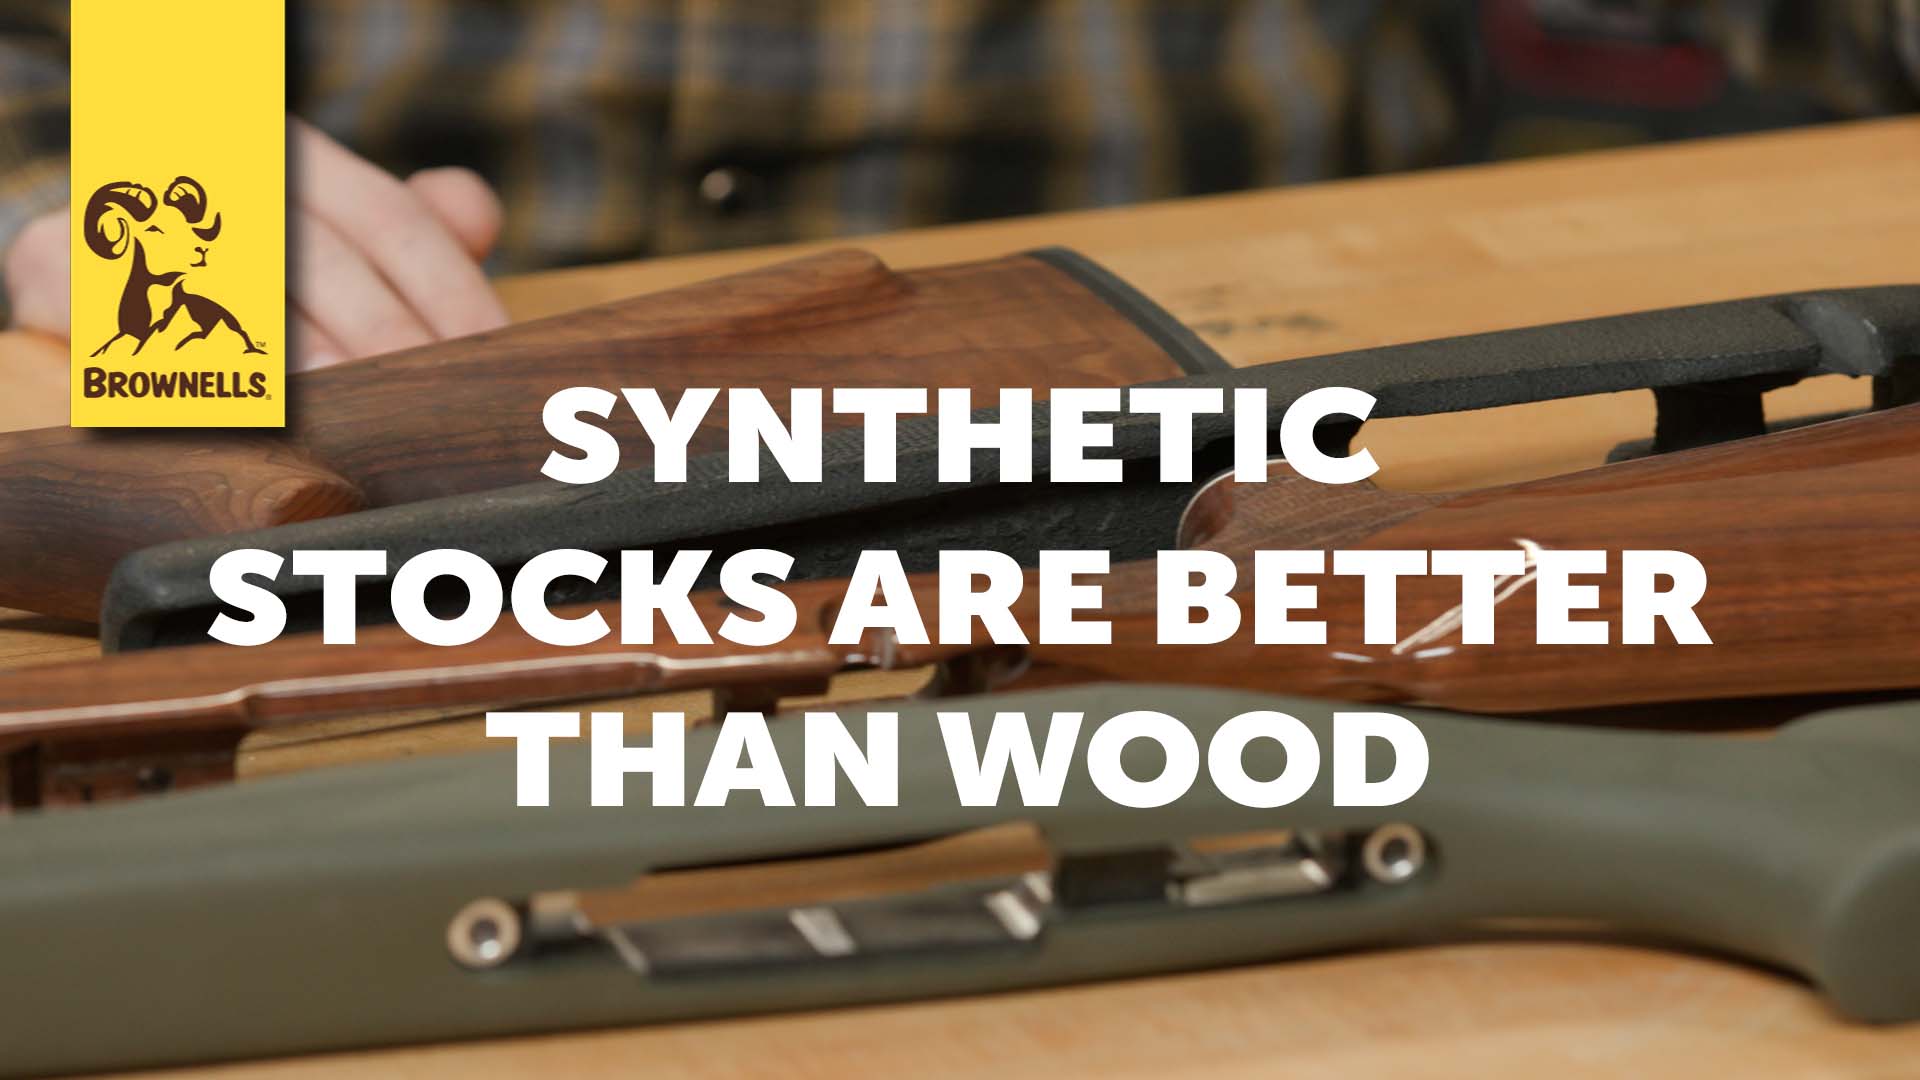 SmythBusters: Synthetic Stocks are Better Than Wood